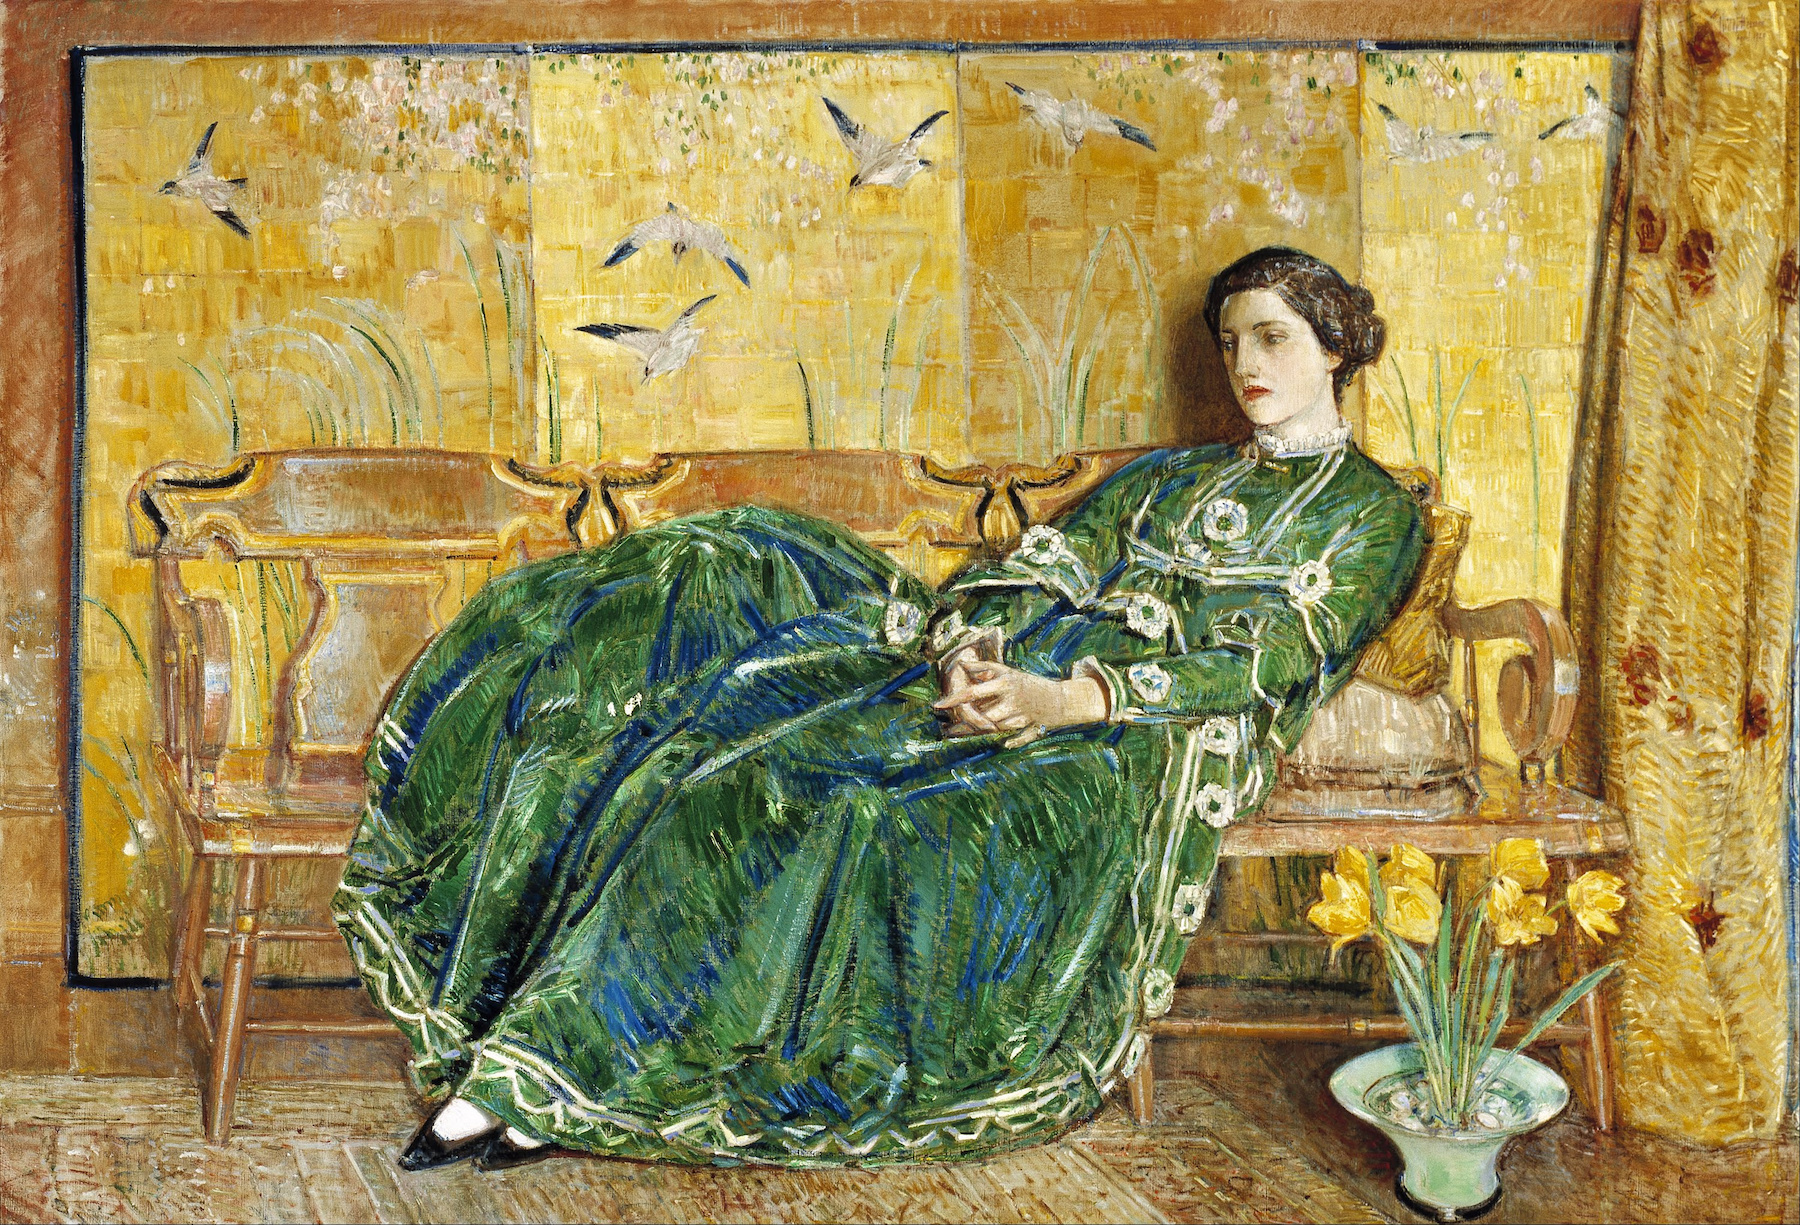 April (The Green Gown) by Frederick Childe Hassam - 1920 - 142 x 208 cm Gibbes Museum of Art